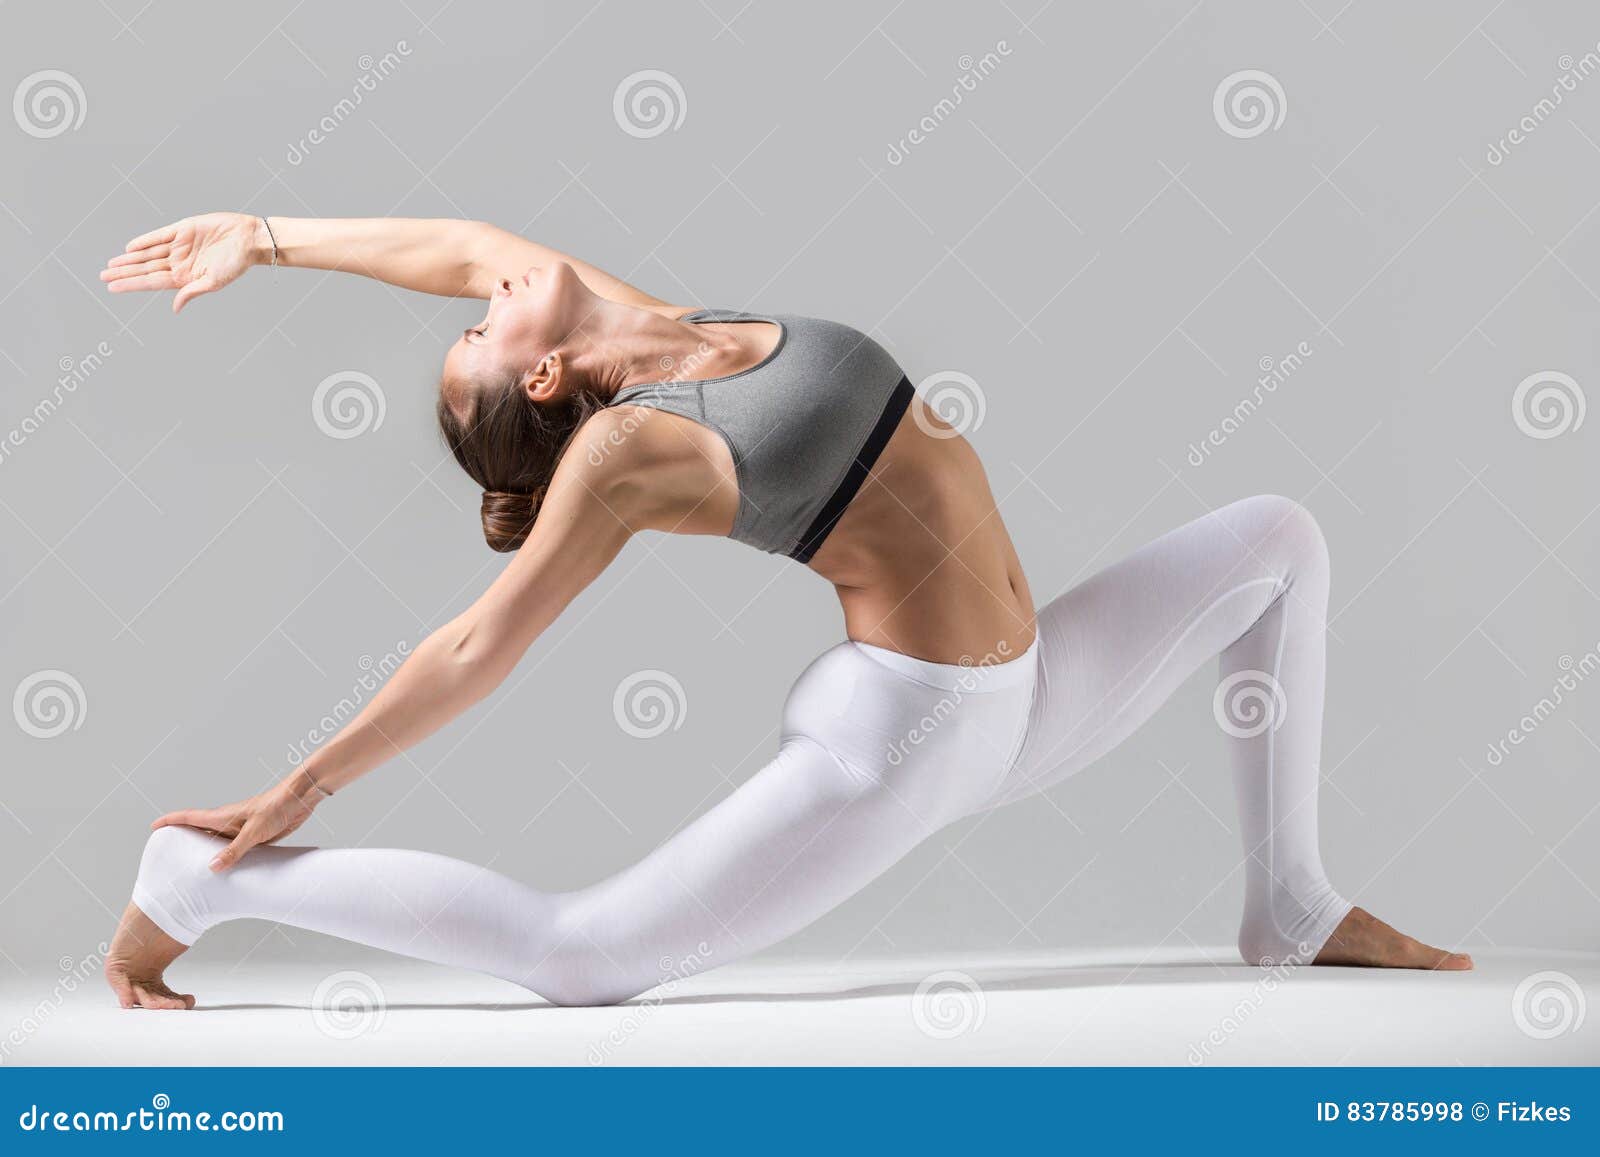 Man doing Yoga. cat cow pose stretch exercise. Flat vector illustration  isolated on white background | Cat cow pose, Cow pose, Cat cow exercise